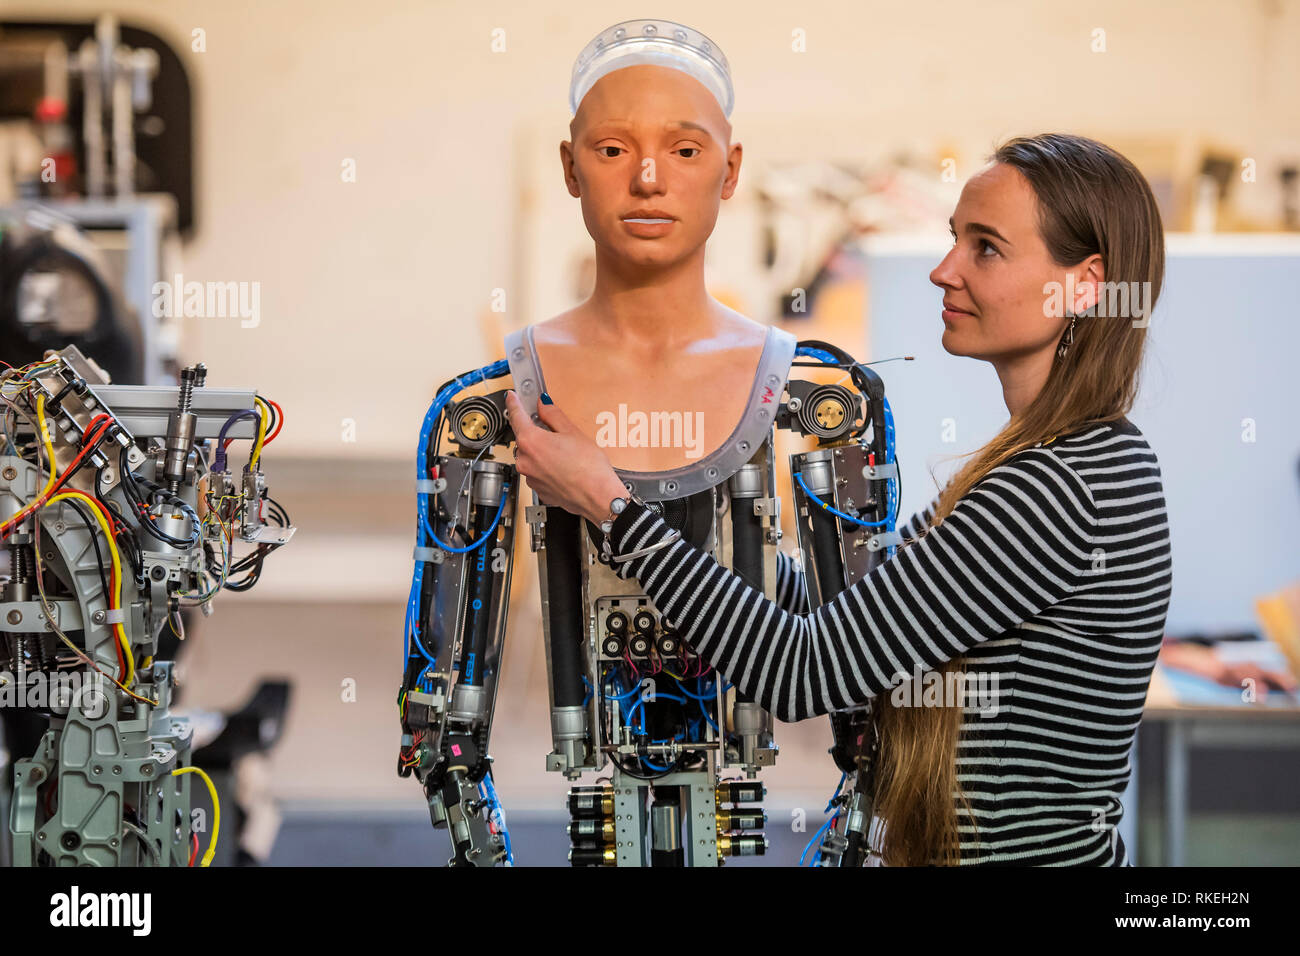 Penrith, Cornwall, UK. 07th Feb, 2019. Ai-da's 'skin' is test positioned on the shoulders of her body - The first humanoid robot artist Ai-Da being assembled at Engineered Arts, Cornwall ahead of her inaugural exhibition at Lady Margaret Hall on 8 May 2019. She is the brainchild of gallery owner and art specialist, Aidan Meller and he will also direct and curate the exhibition. Credit: Guy Bell/Alamy Live News Stock Photo